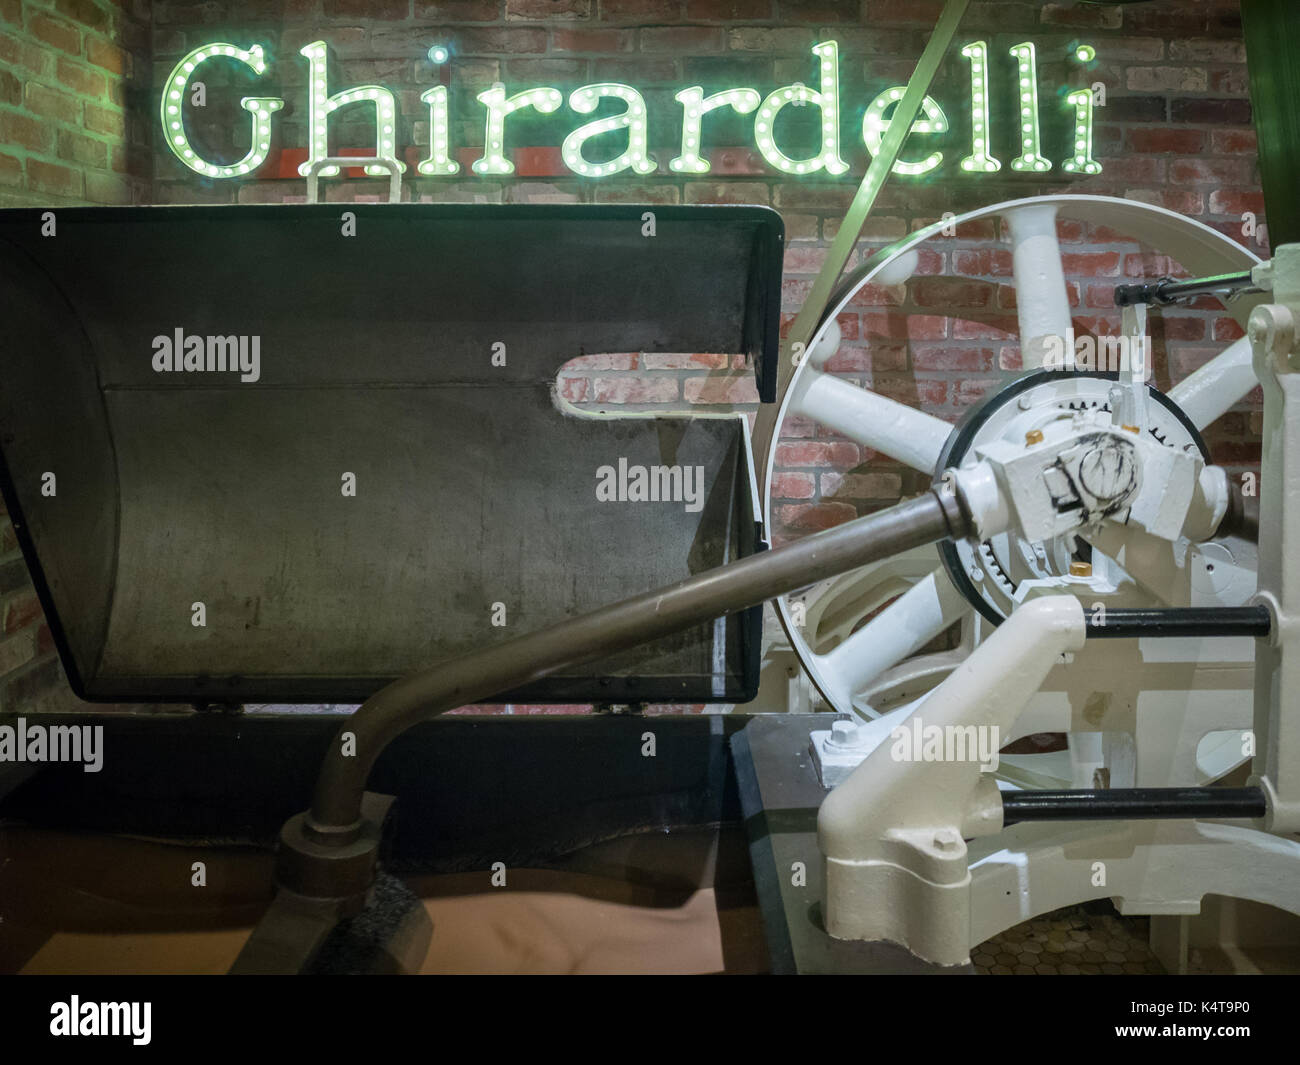 Chocolate manufacturing equipment at the Ghirardelli Original Chocolate Manufactory at Ghirardelli Square in San Francisco, California. Stock Photo